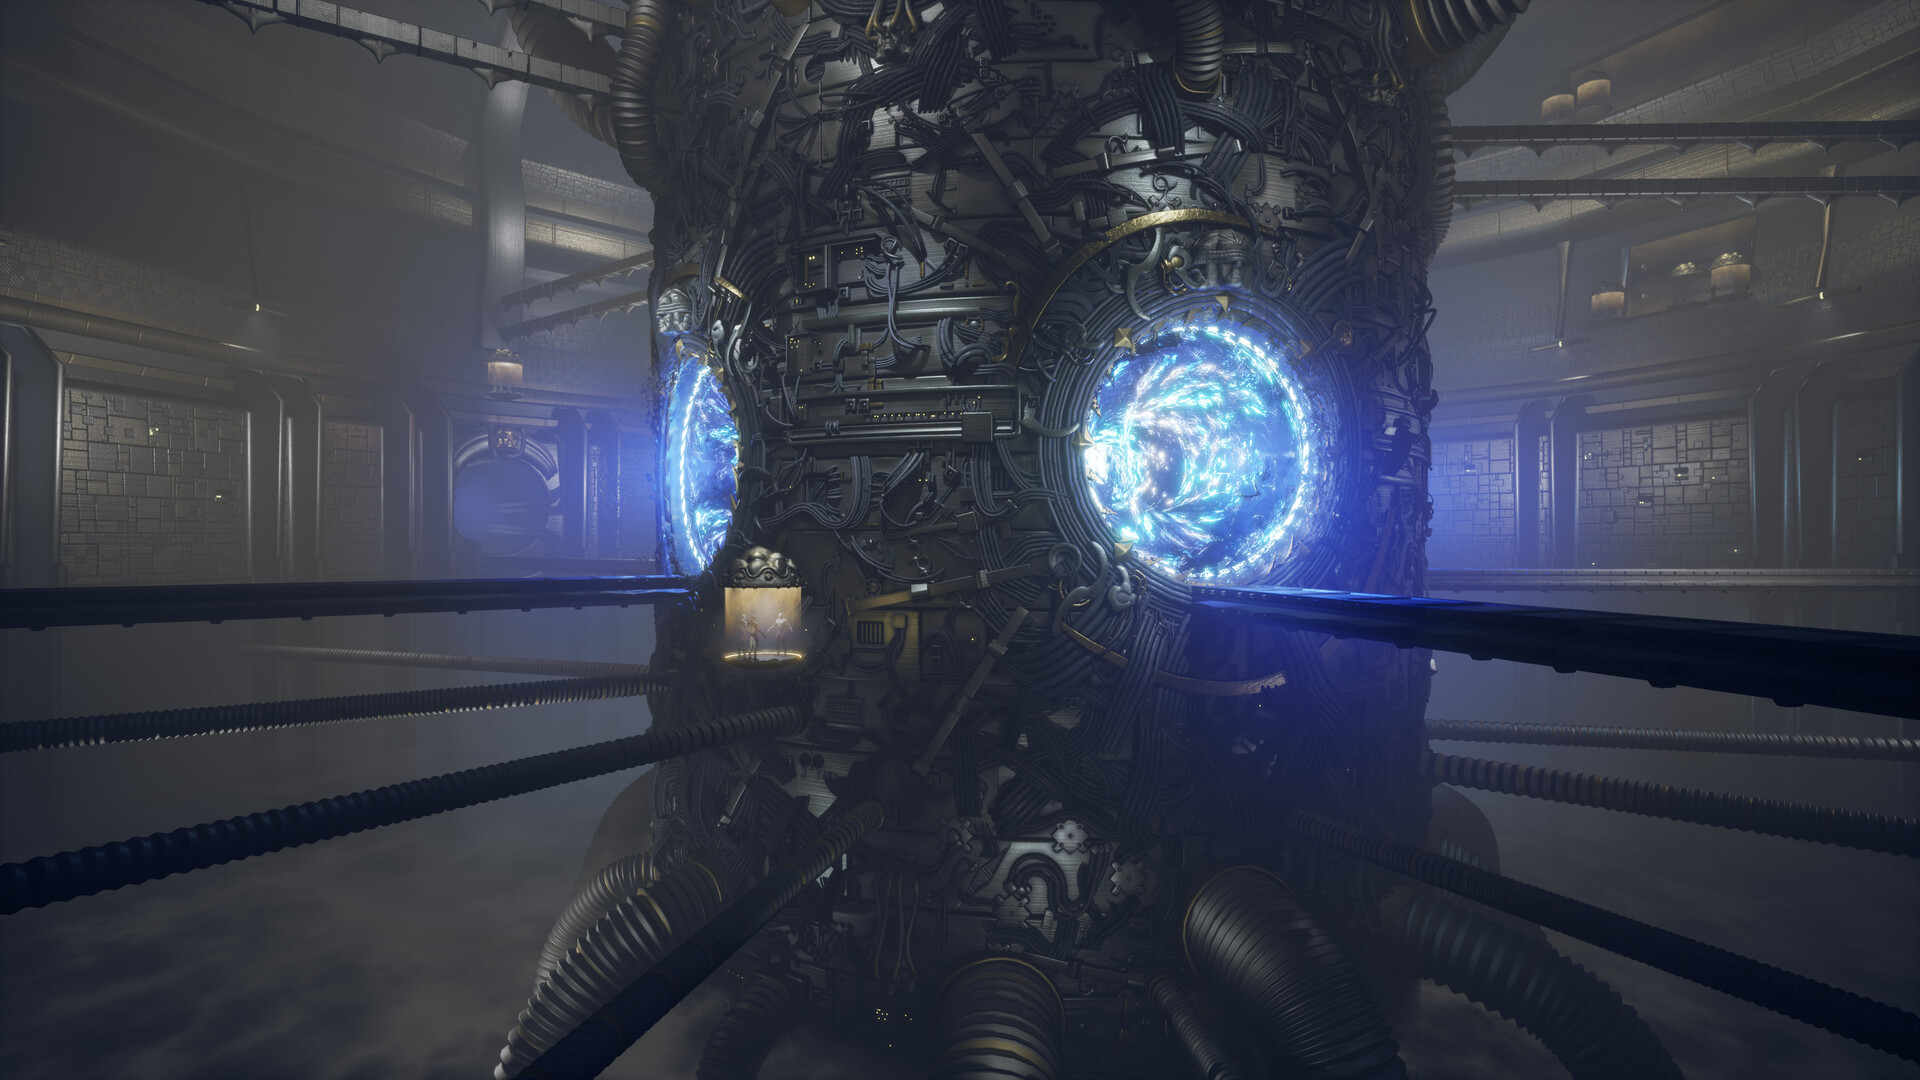 Main angle screenshot from Unreal 4. The cylinder large structure of the portal device is in focal point of the image. The openings with the portals now shimmer in additional emissive sparks on their VFX tori.